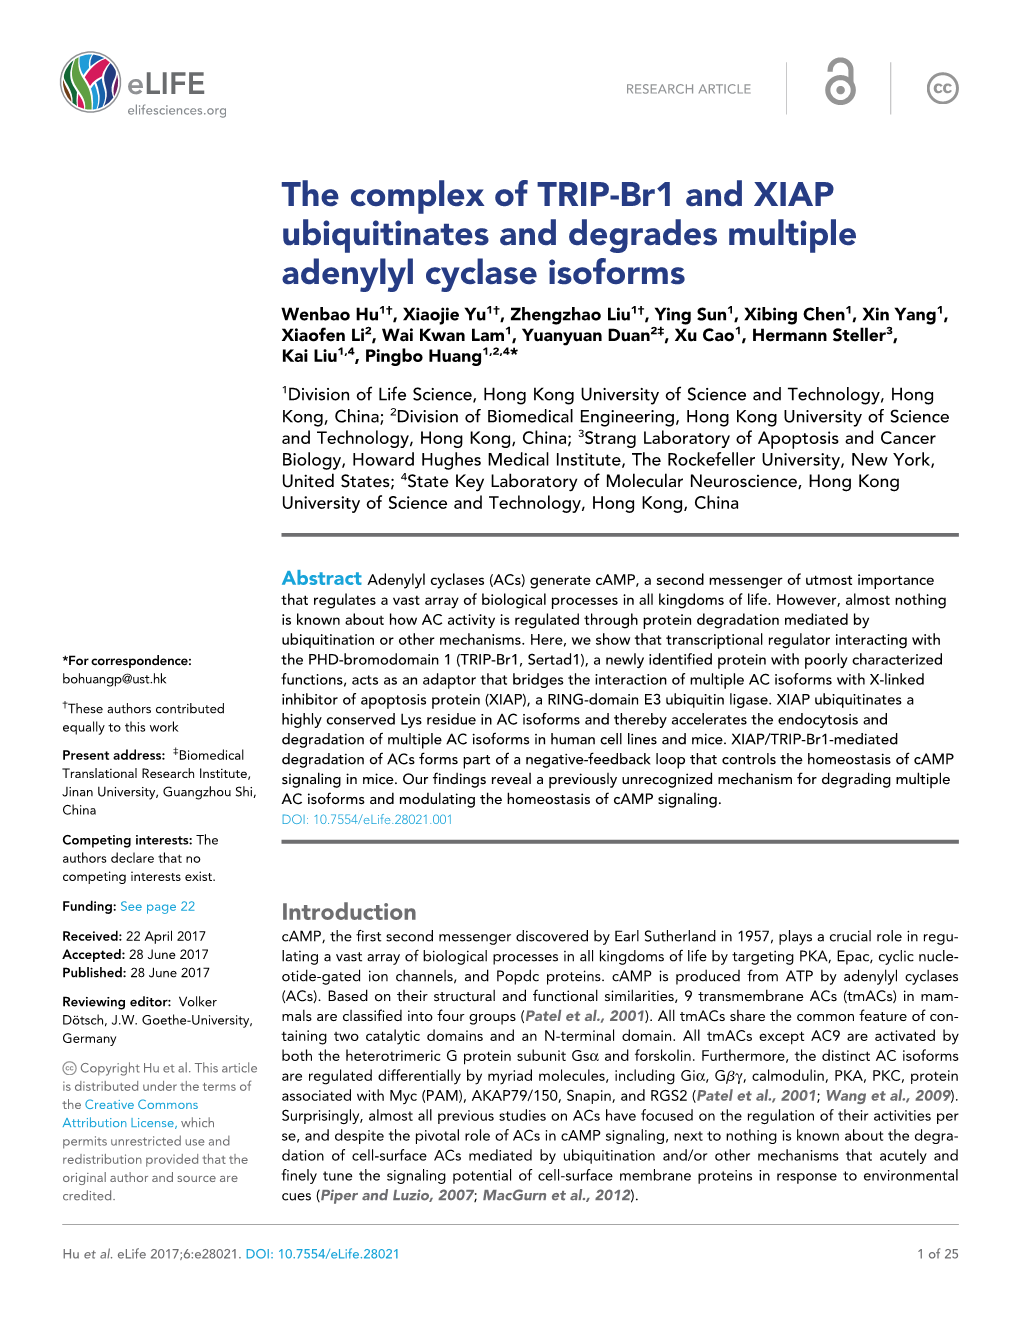 The Complex of TRIP-Br1 and XIAP Ubiquitinates and Degrades Multiple